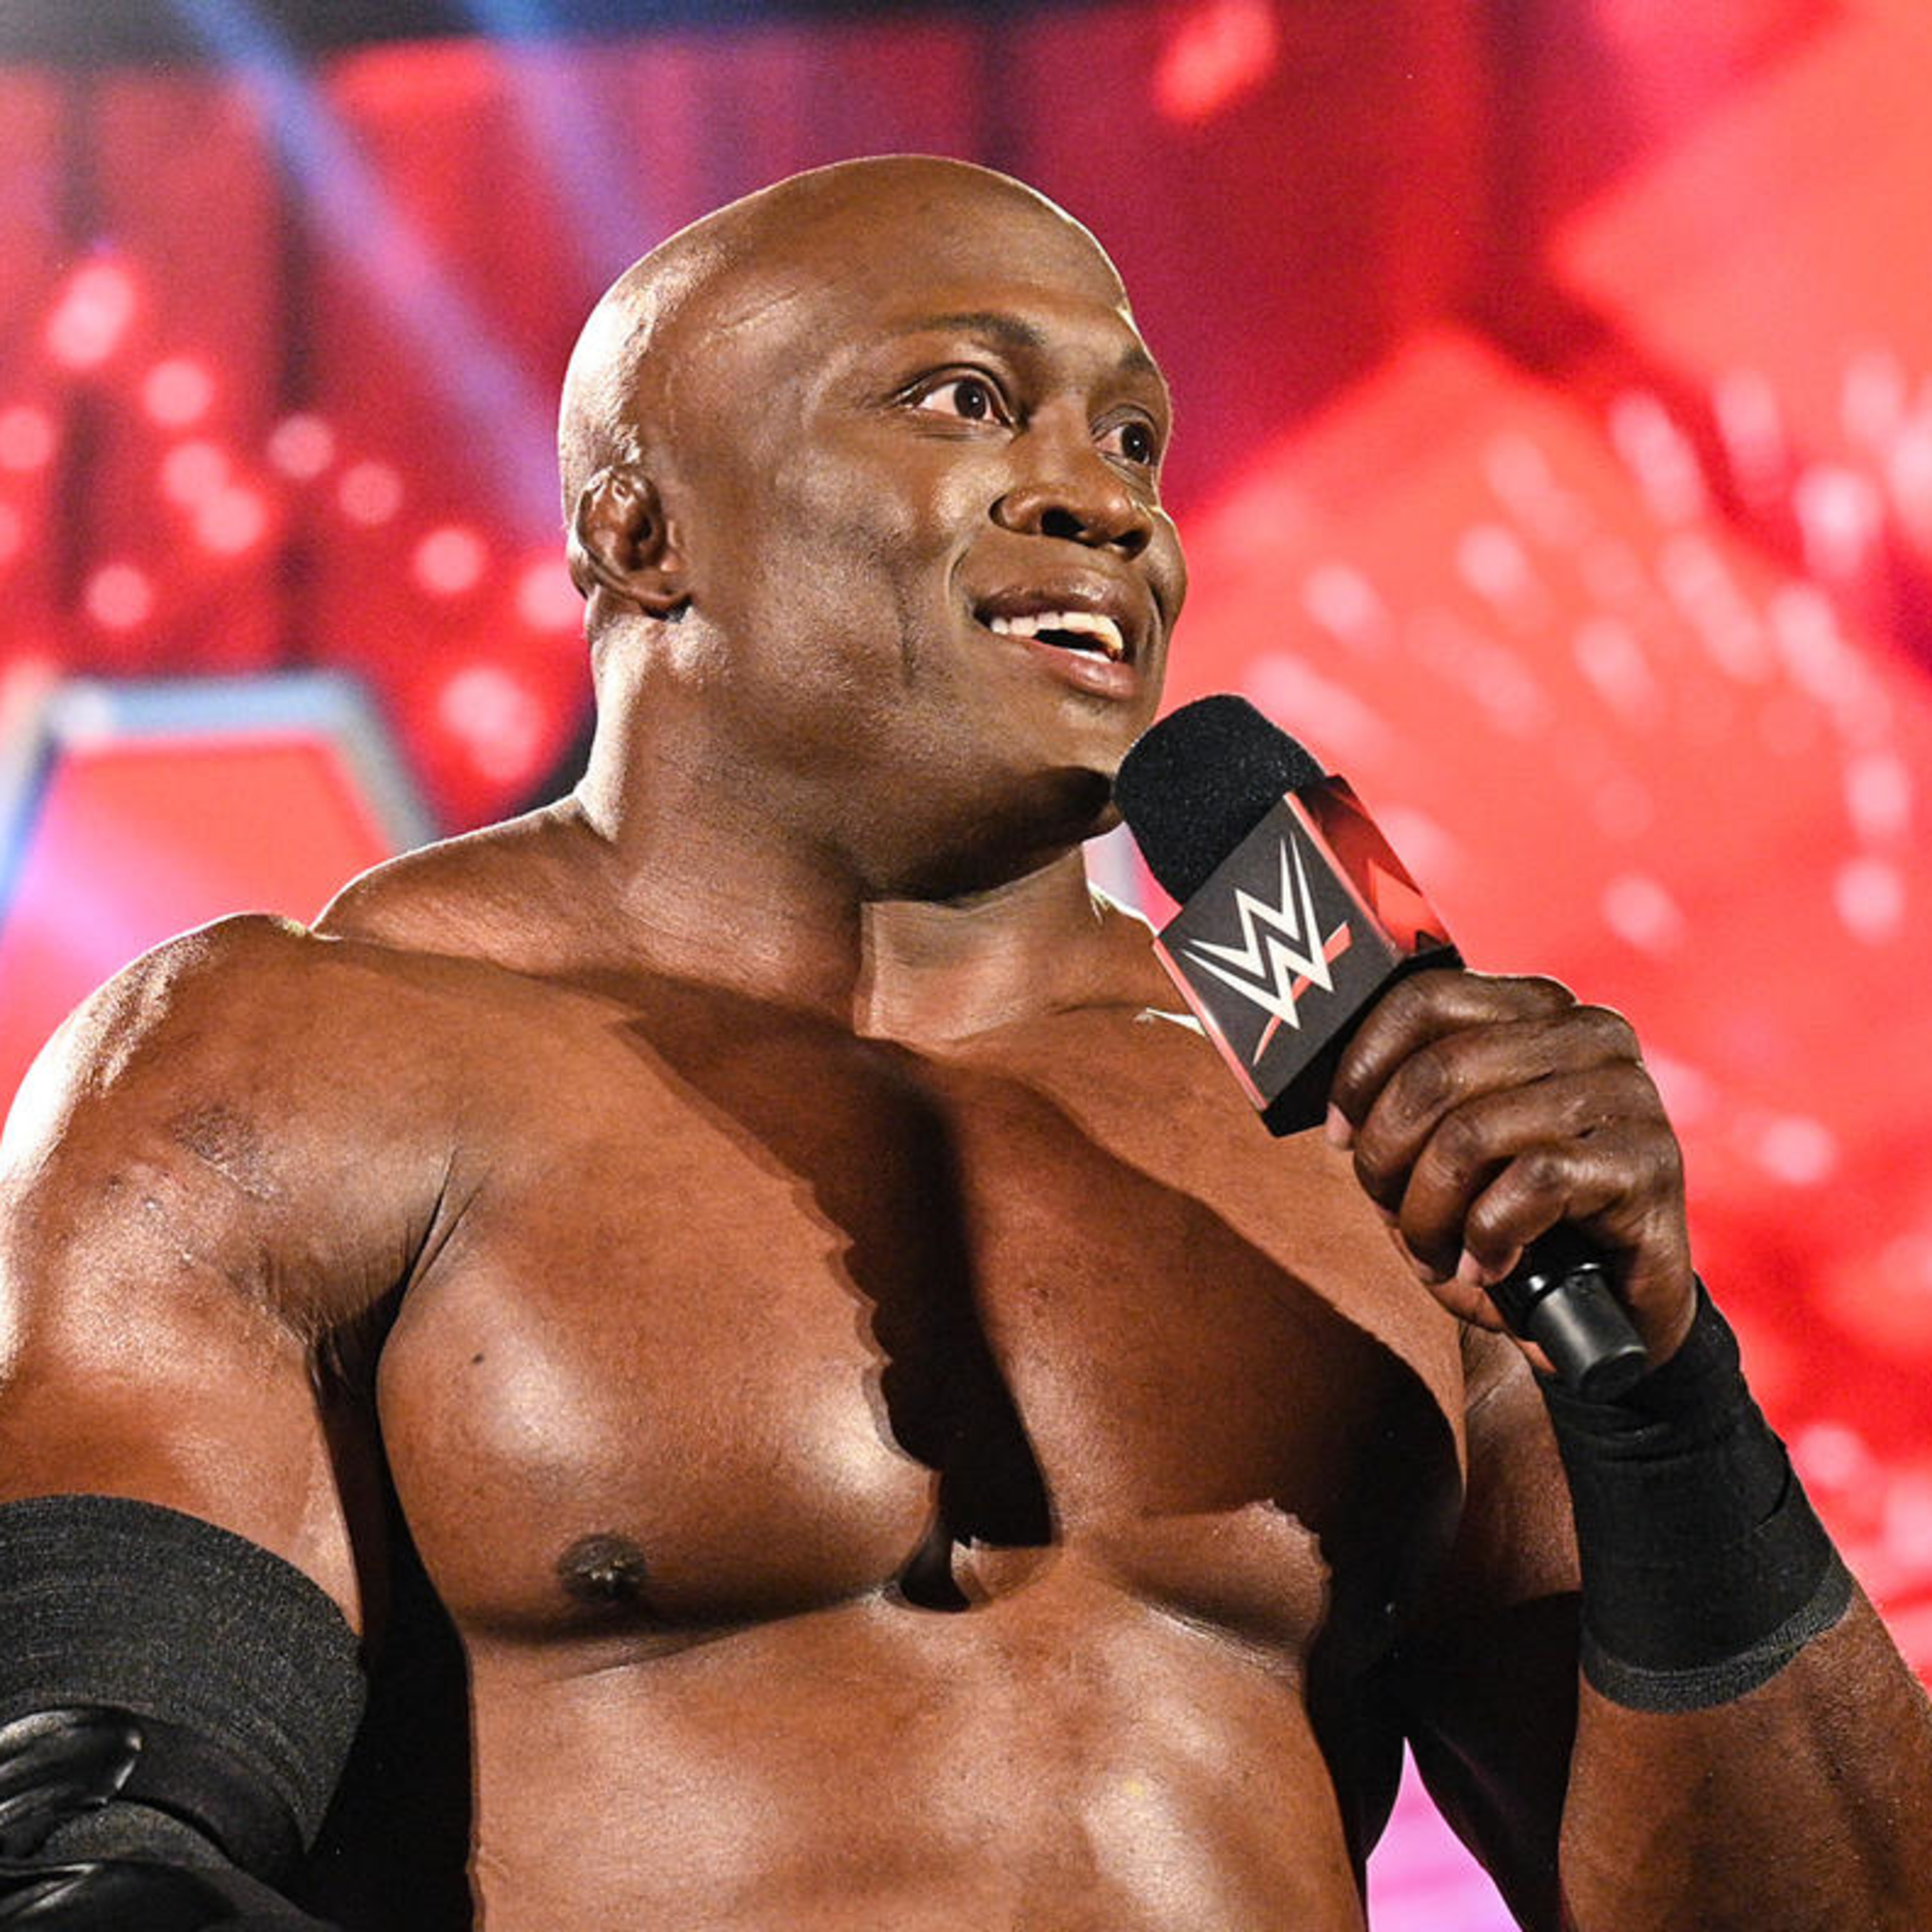 Bobby Lashley, Street Profits Are Best Babyfaces to Carry WWE Raw This Summer